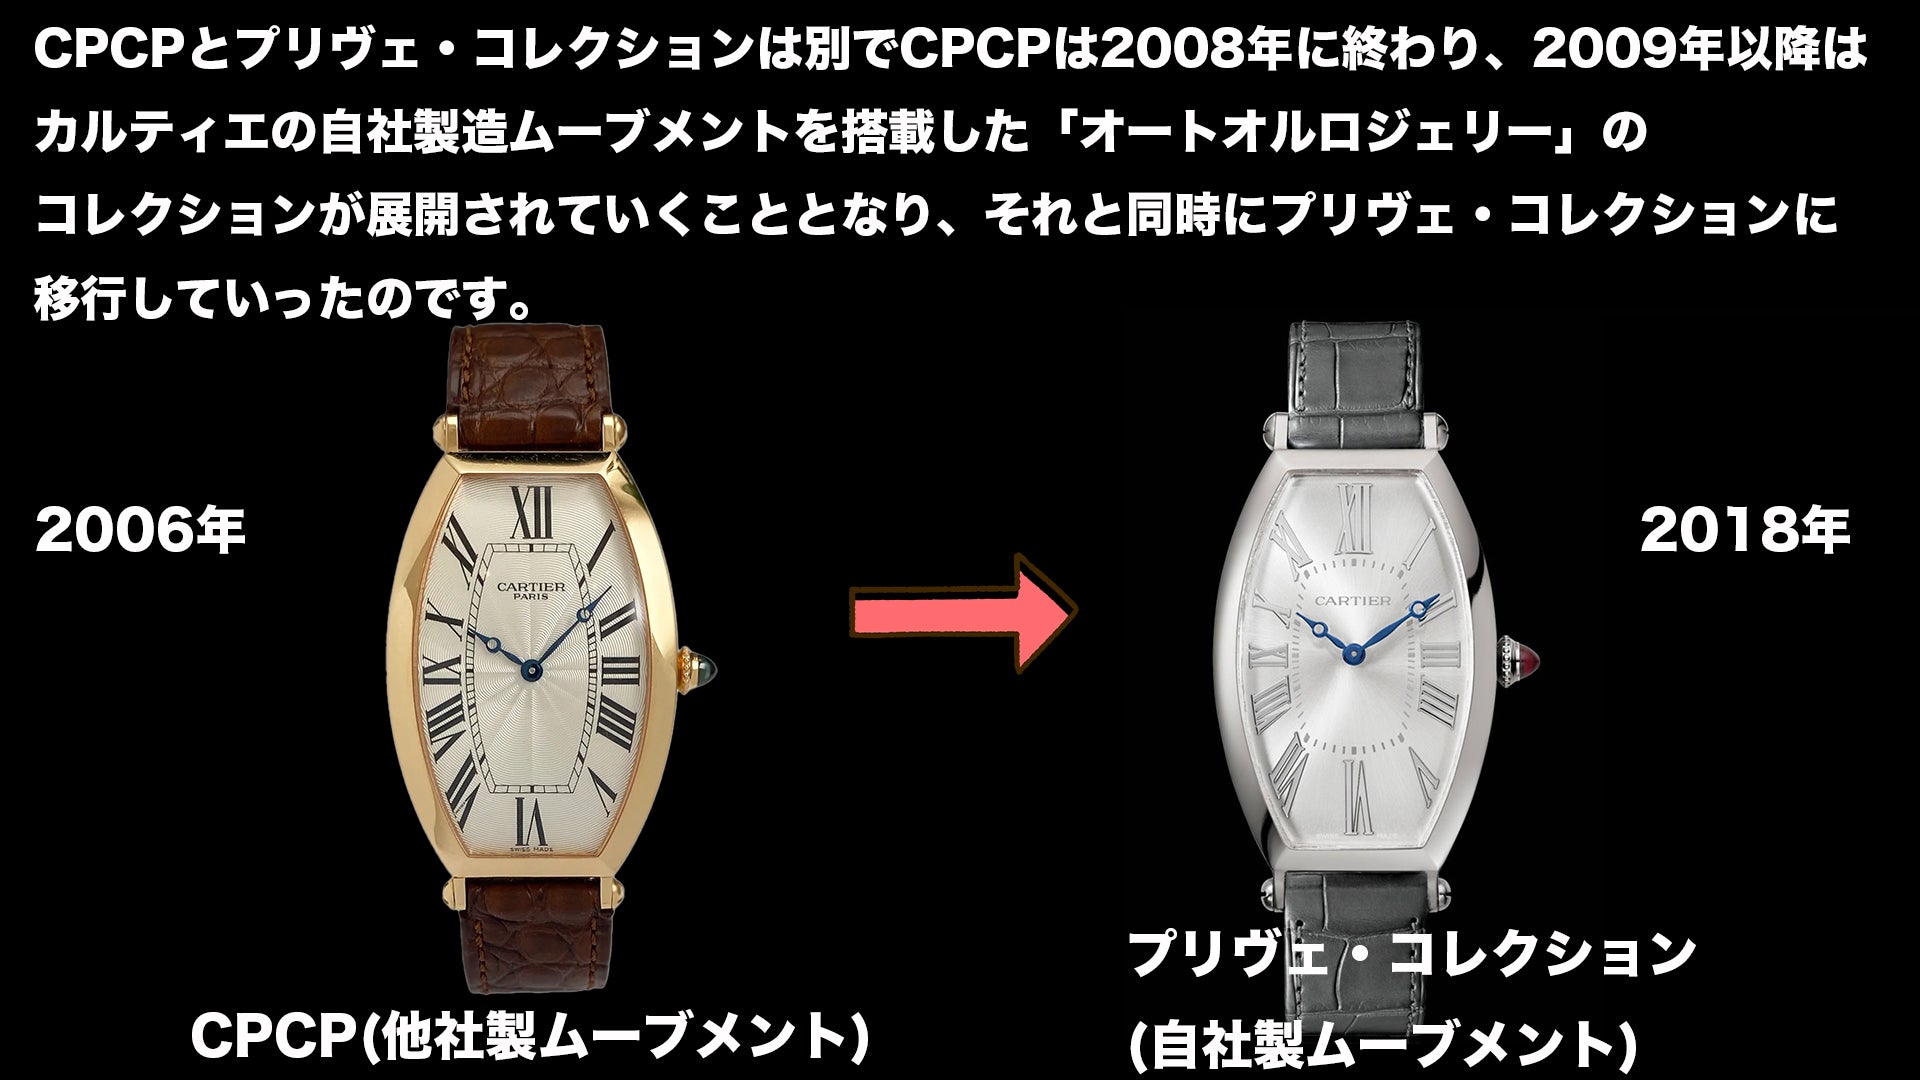 The difference between Cartier watches CPCP and the Privé collection